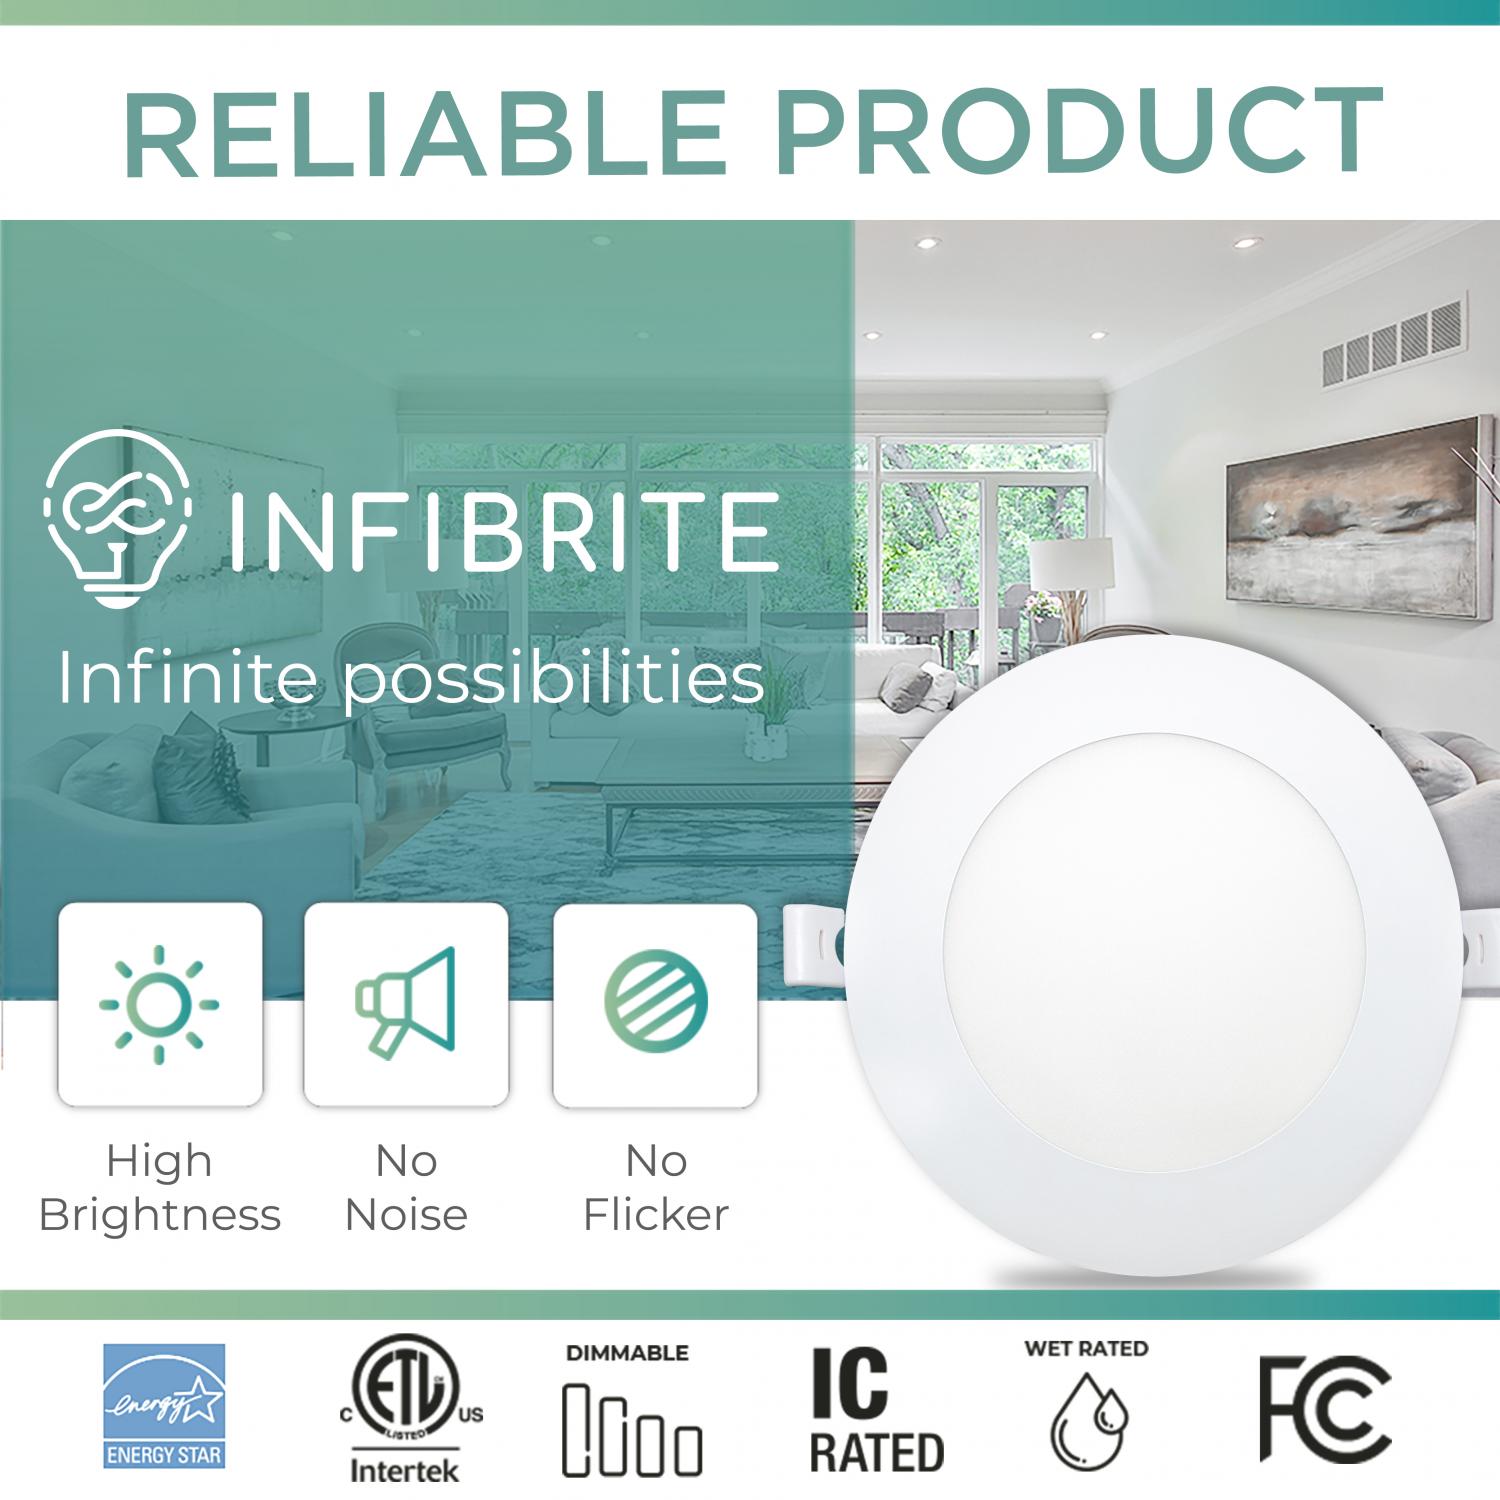 Infibrite 6 Inch 3000K Warm White 12W 1050LM Ultra-Slim LED Ceiling Light with Junction Box, Flush Mount, Dimmable, Fixture for Bedroom, Wet Rated for Bathroom, Easy Install, 110W Eqv, ETL & Energy Star, US Company (6 Pack)